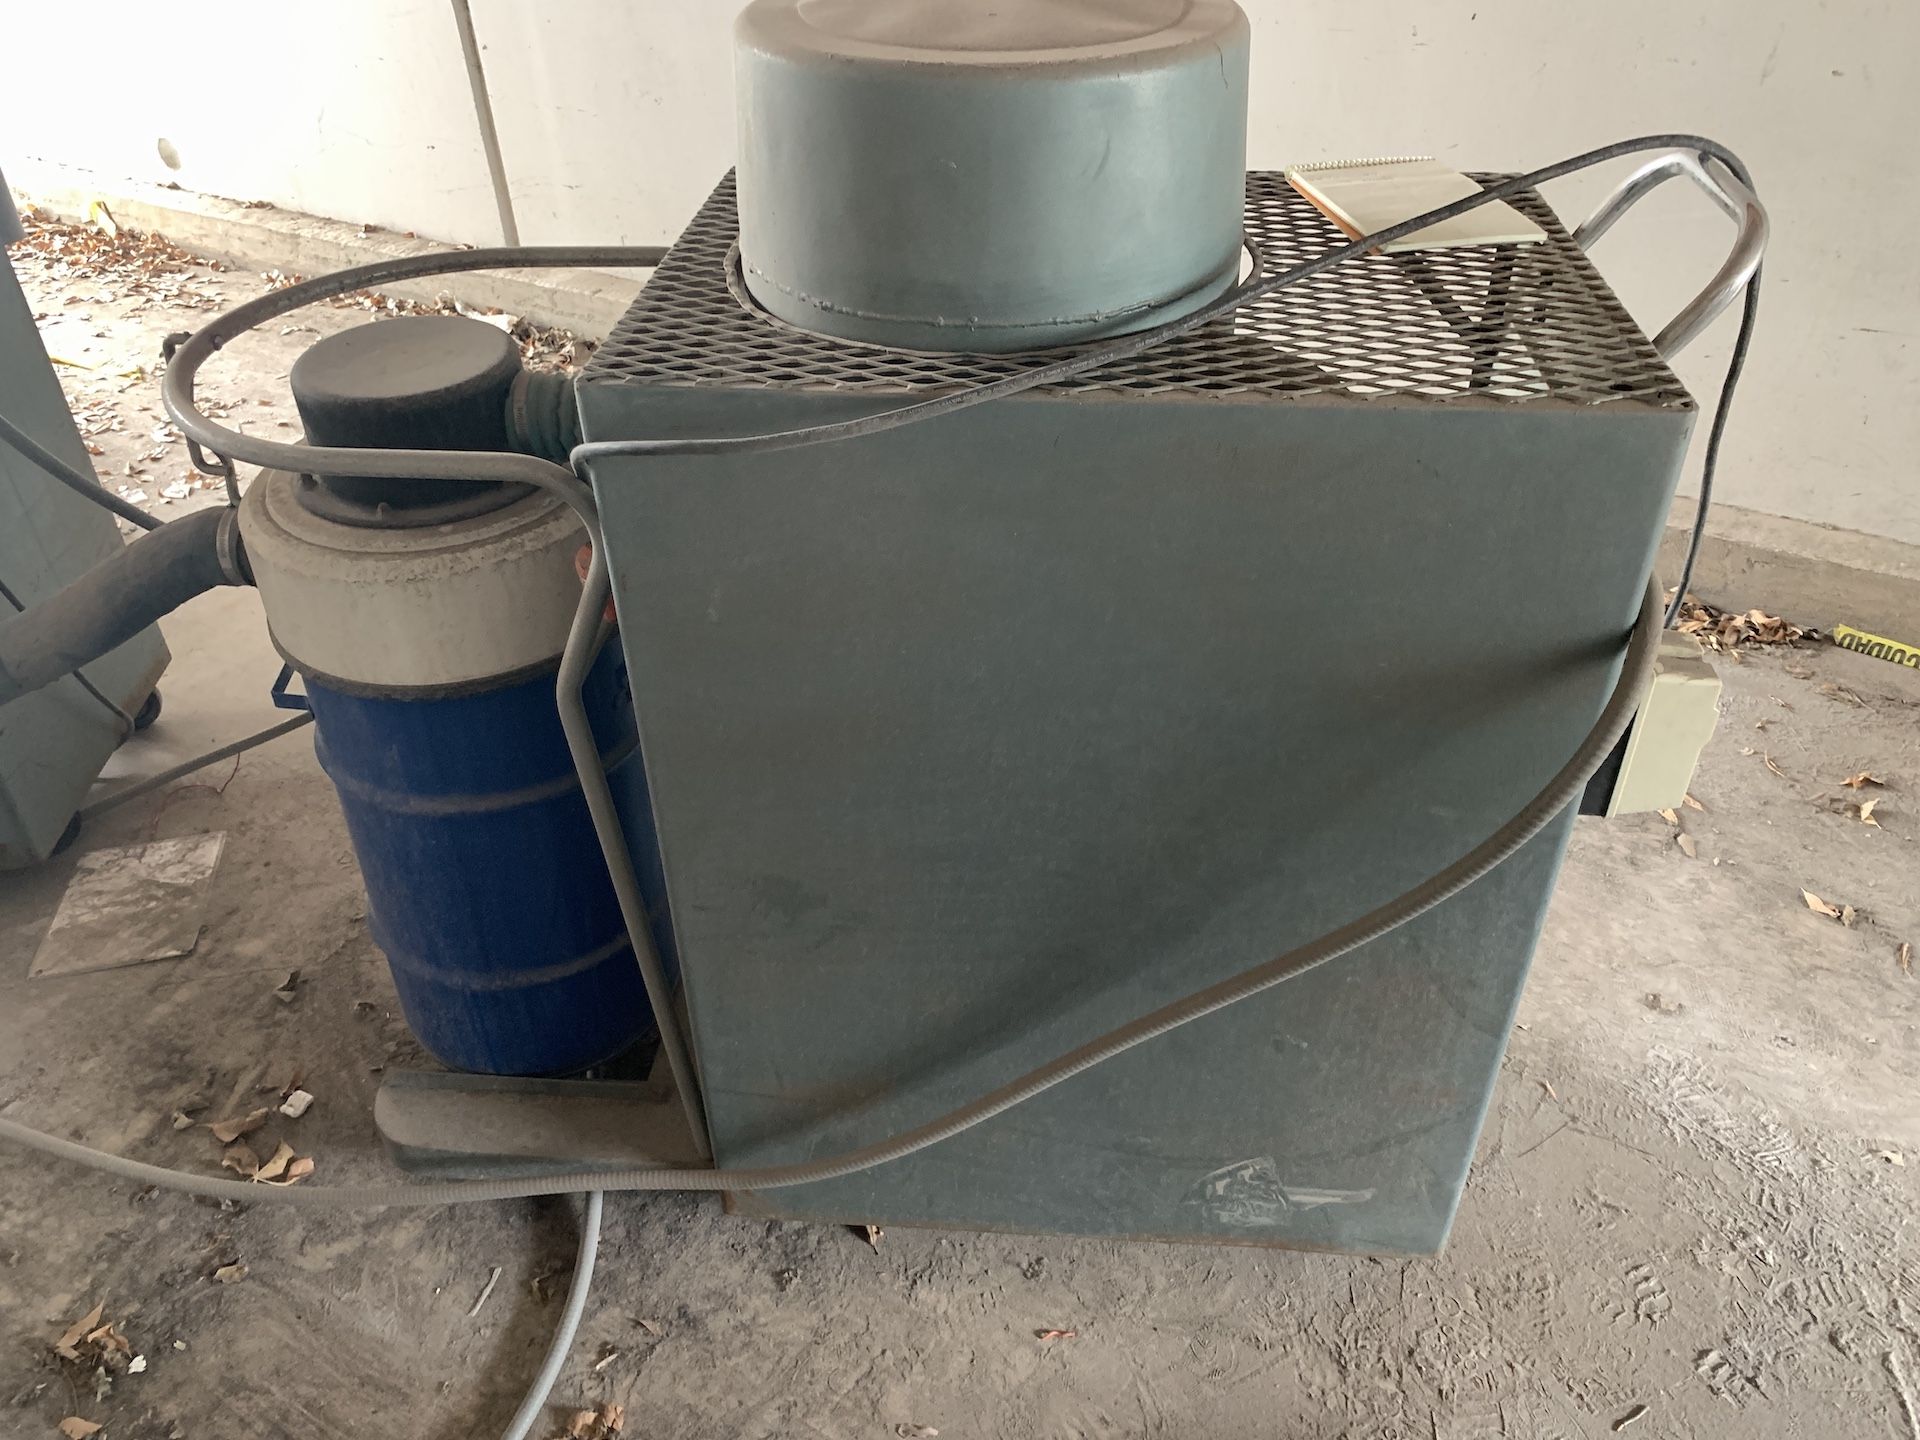 Ryvac Engineering 7.5 hp dust collector